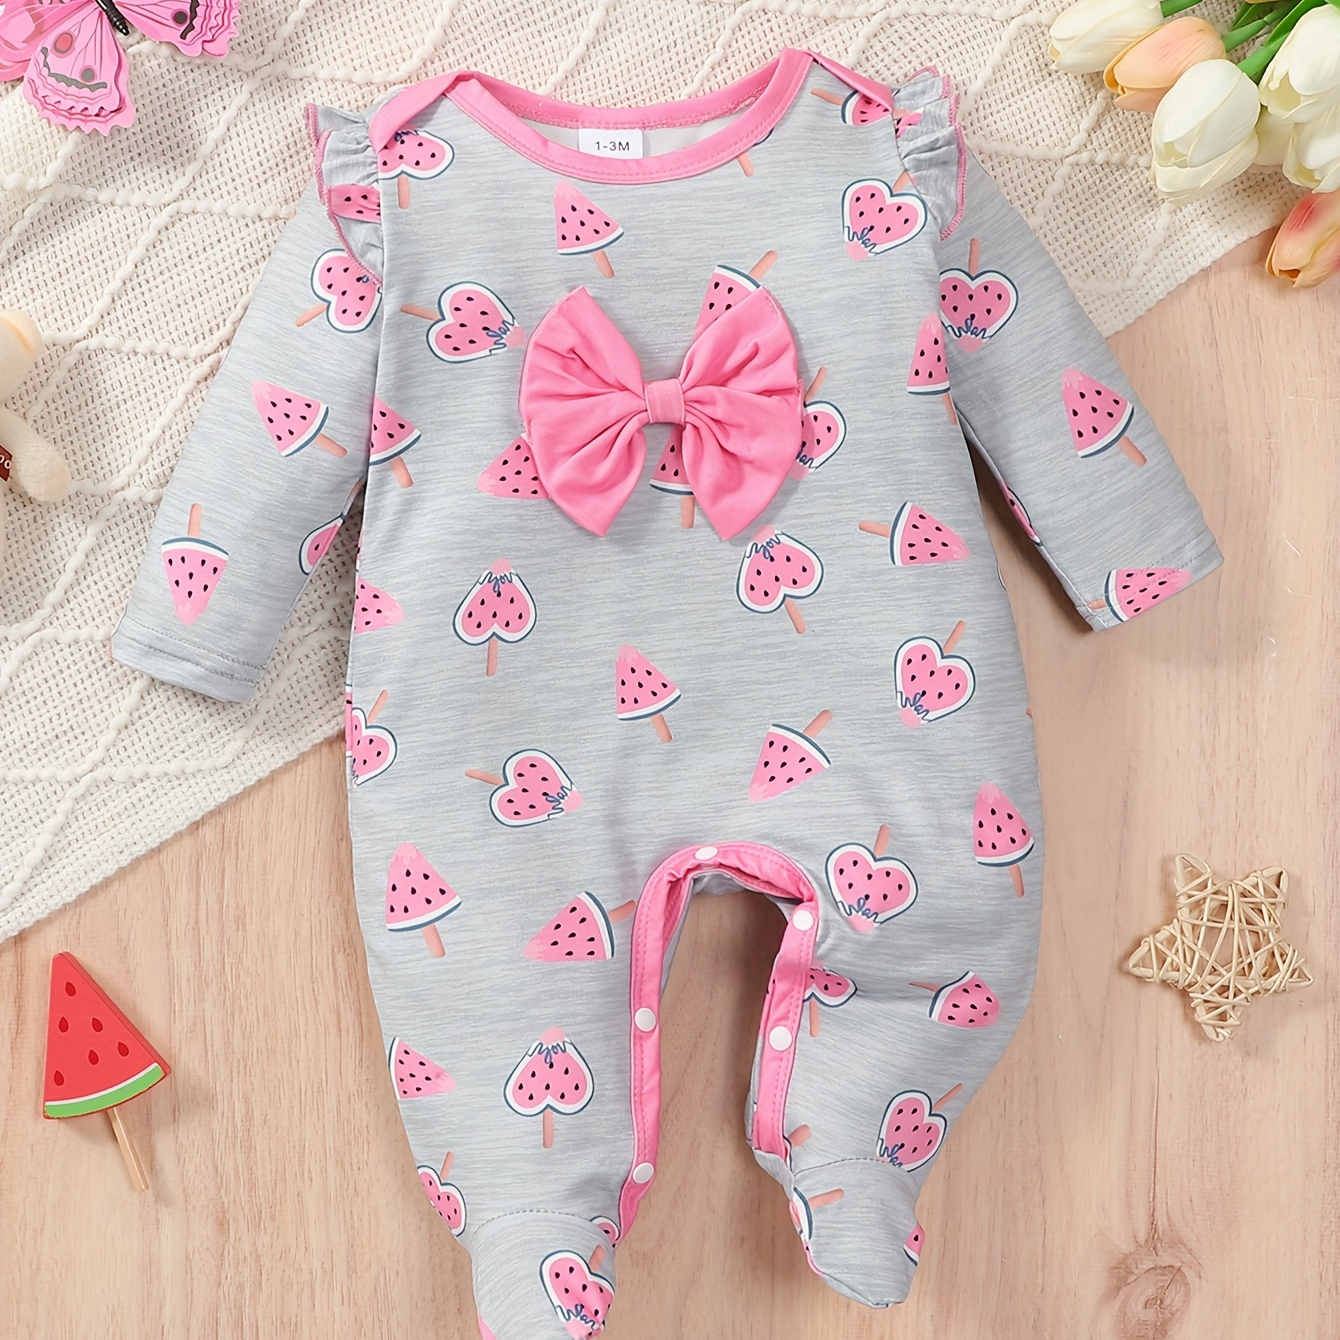 

Newborn Baby's Bowknot Decor Footed Bodysuit, Casual Watermelon Pattern Long Sleeve Romper, Toddler & Infant Girl's Onesie, As Gift